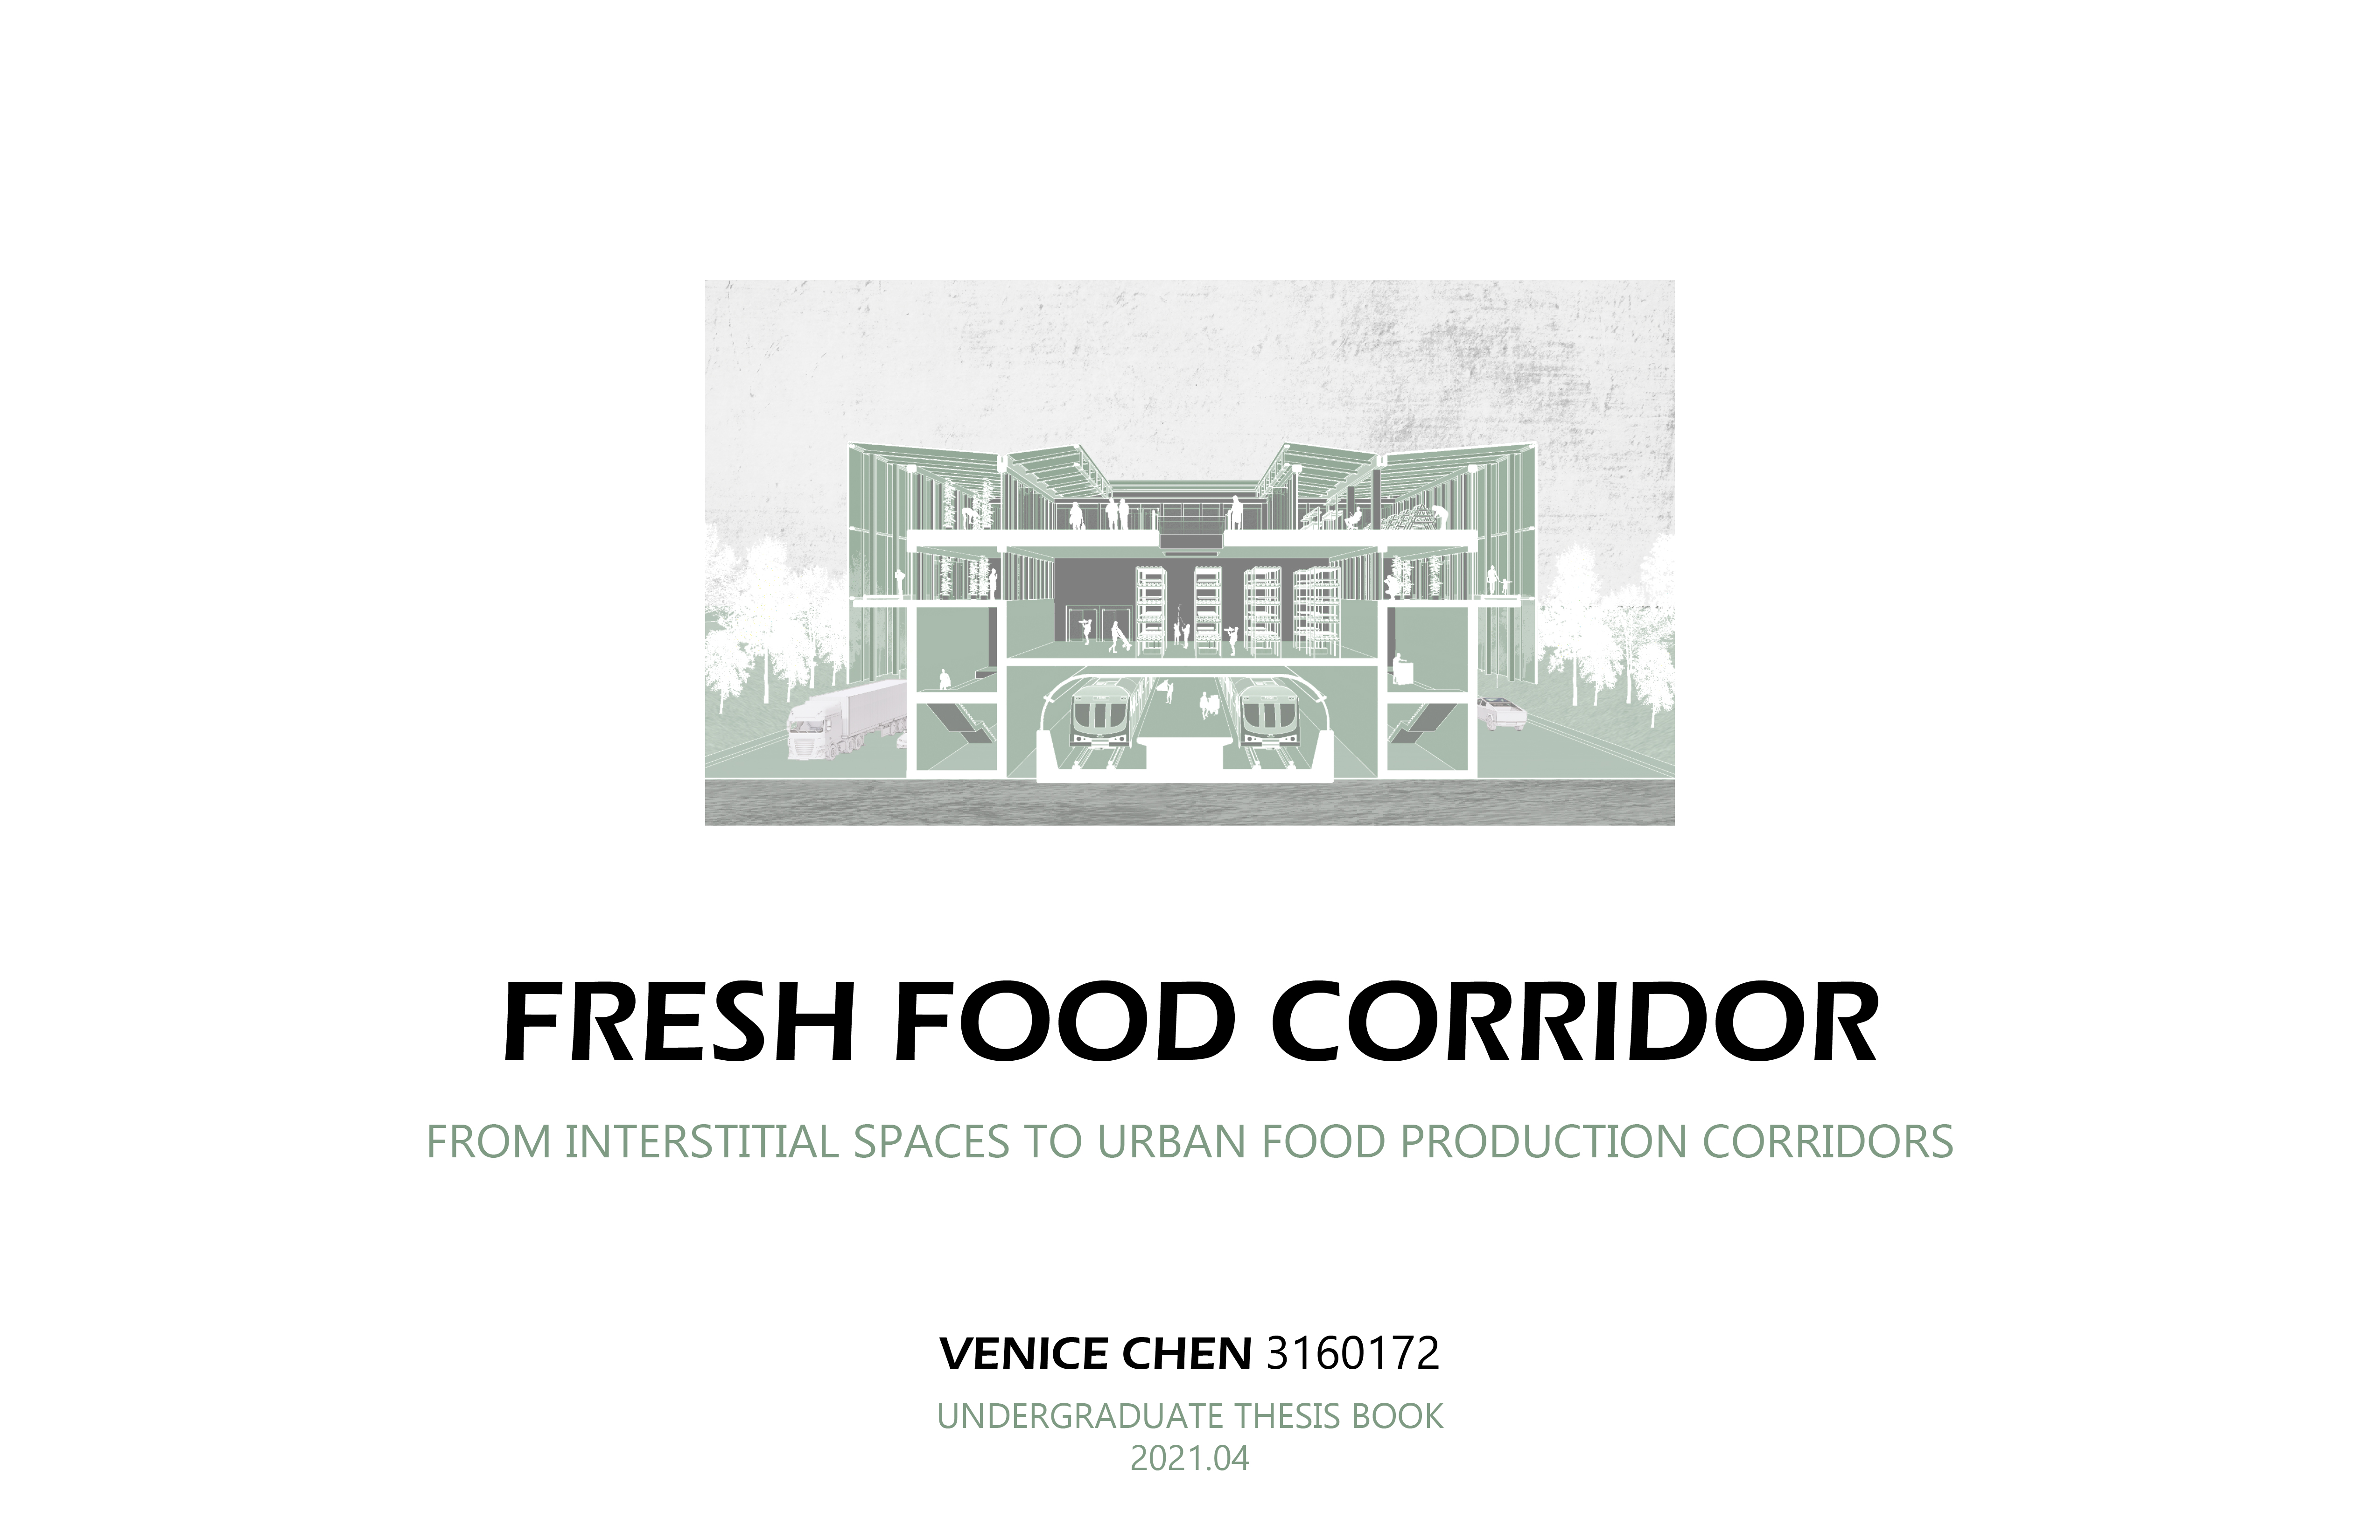 Fresh Food Corridor——From Interstitial spaces to Urban Food Production Corridors